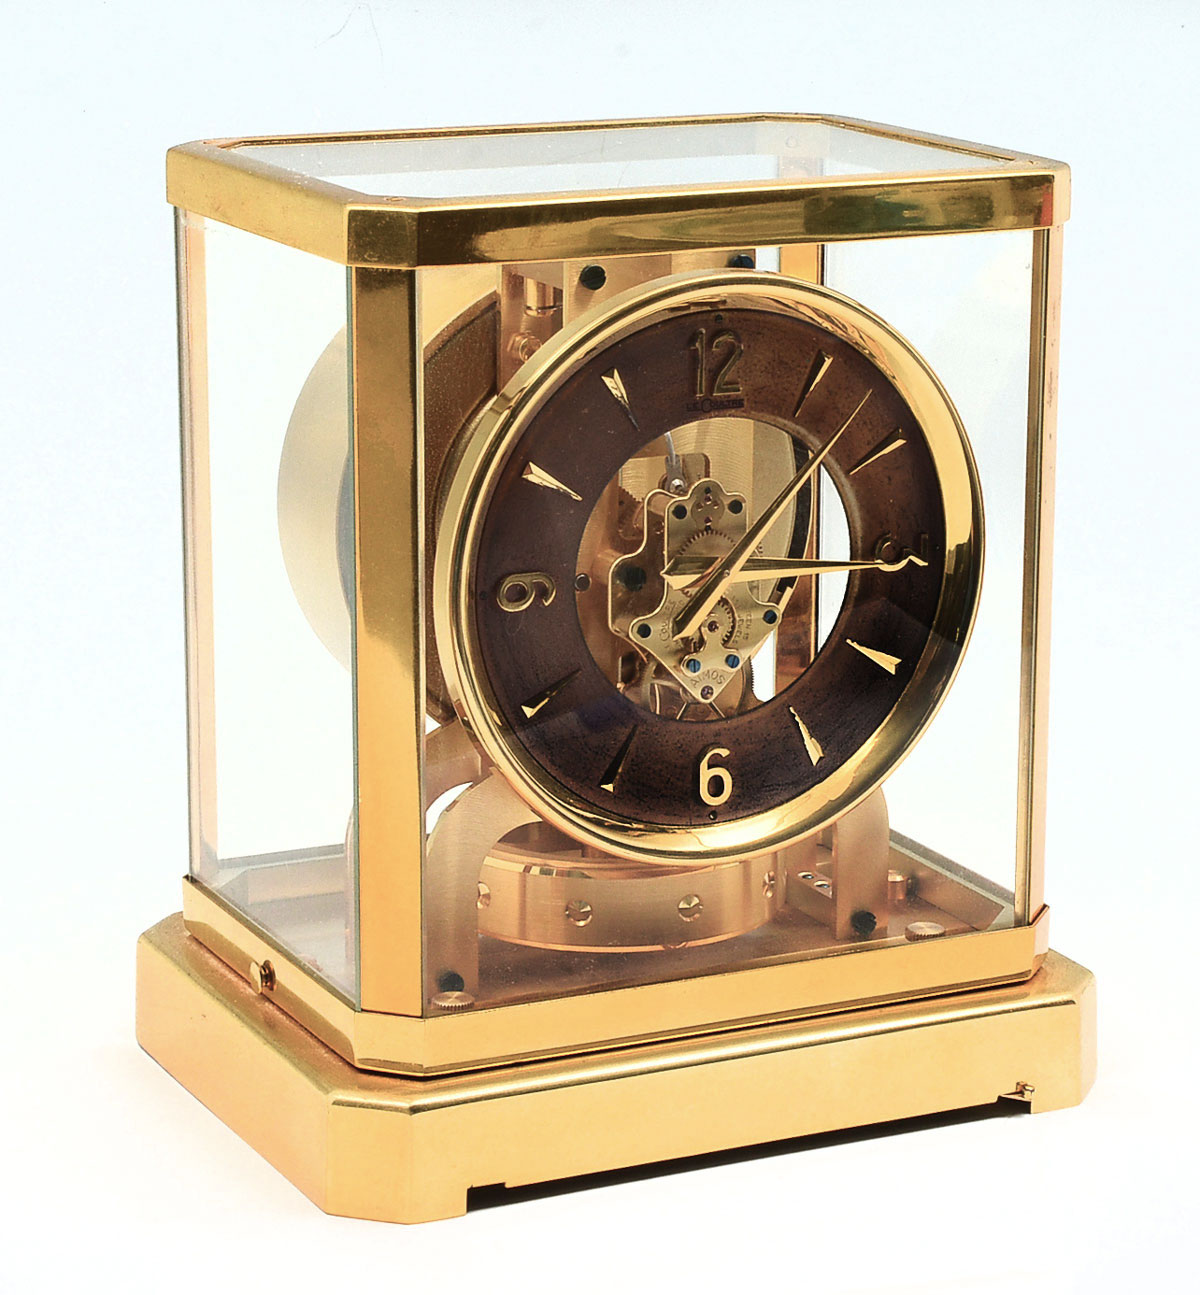 LE COULTRE ATMOS CLOCK Patinated 36e34f